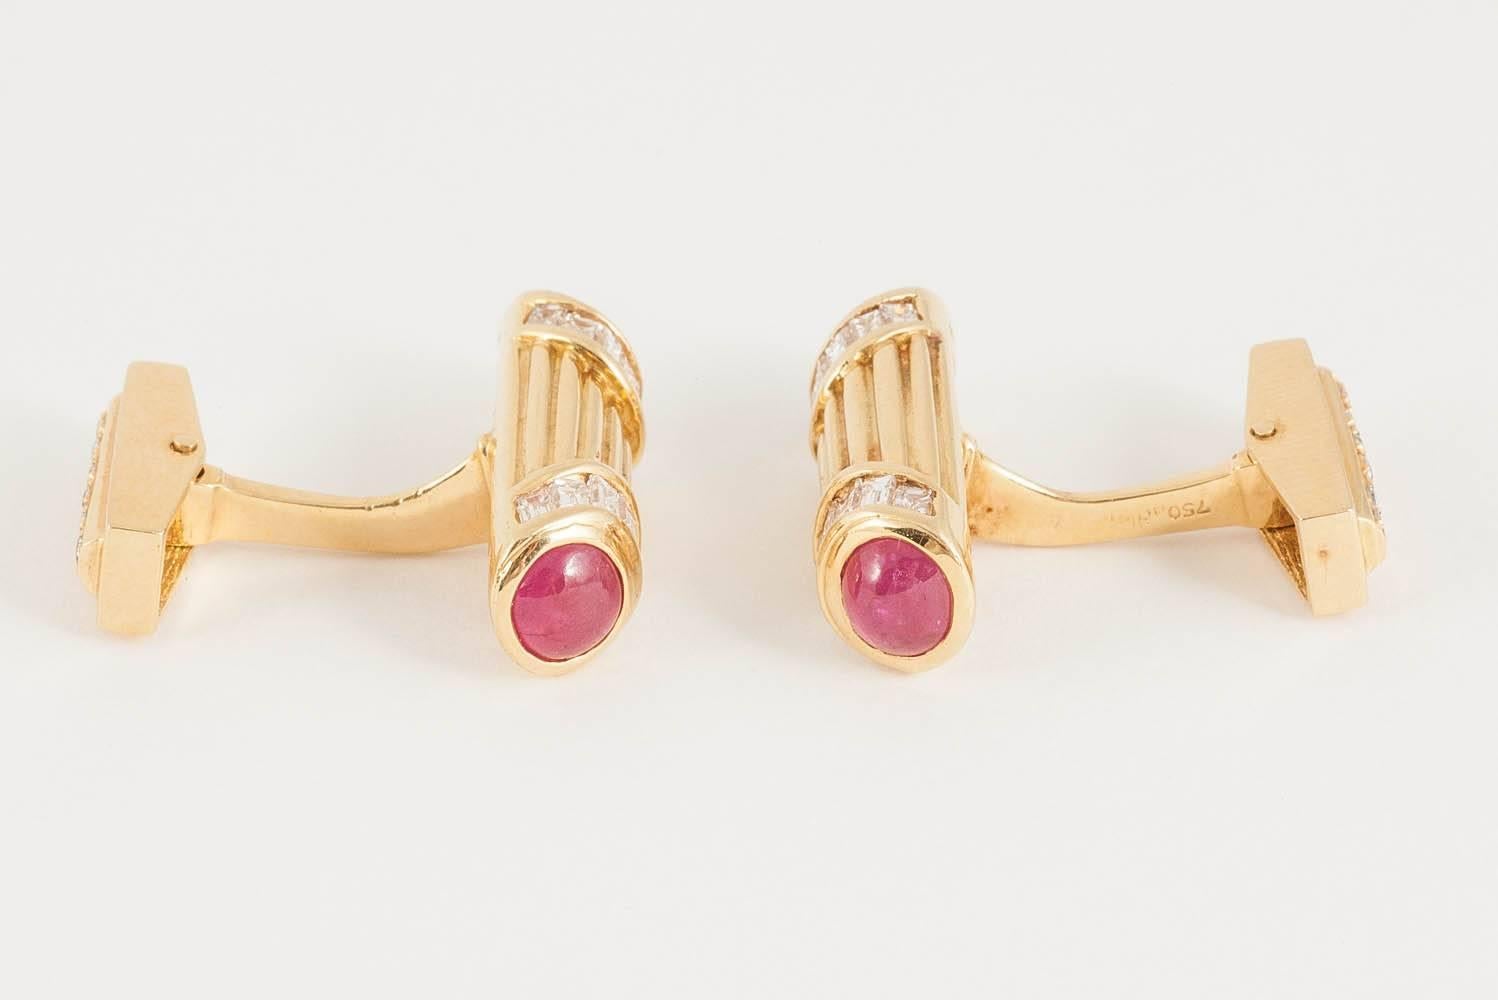 Heavy quality pair of 18ct yellow gold cufflinks,one end set with two,cabochon cut rubies and tapered baguette cut diamonds,the other swivelled terminal set with small diamonds.signed Adler,who traded from a shop in London’s west end.c 1970